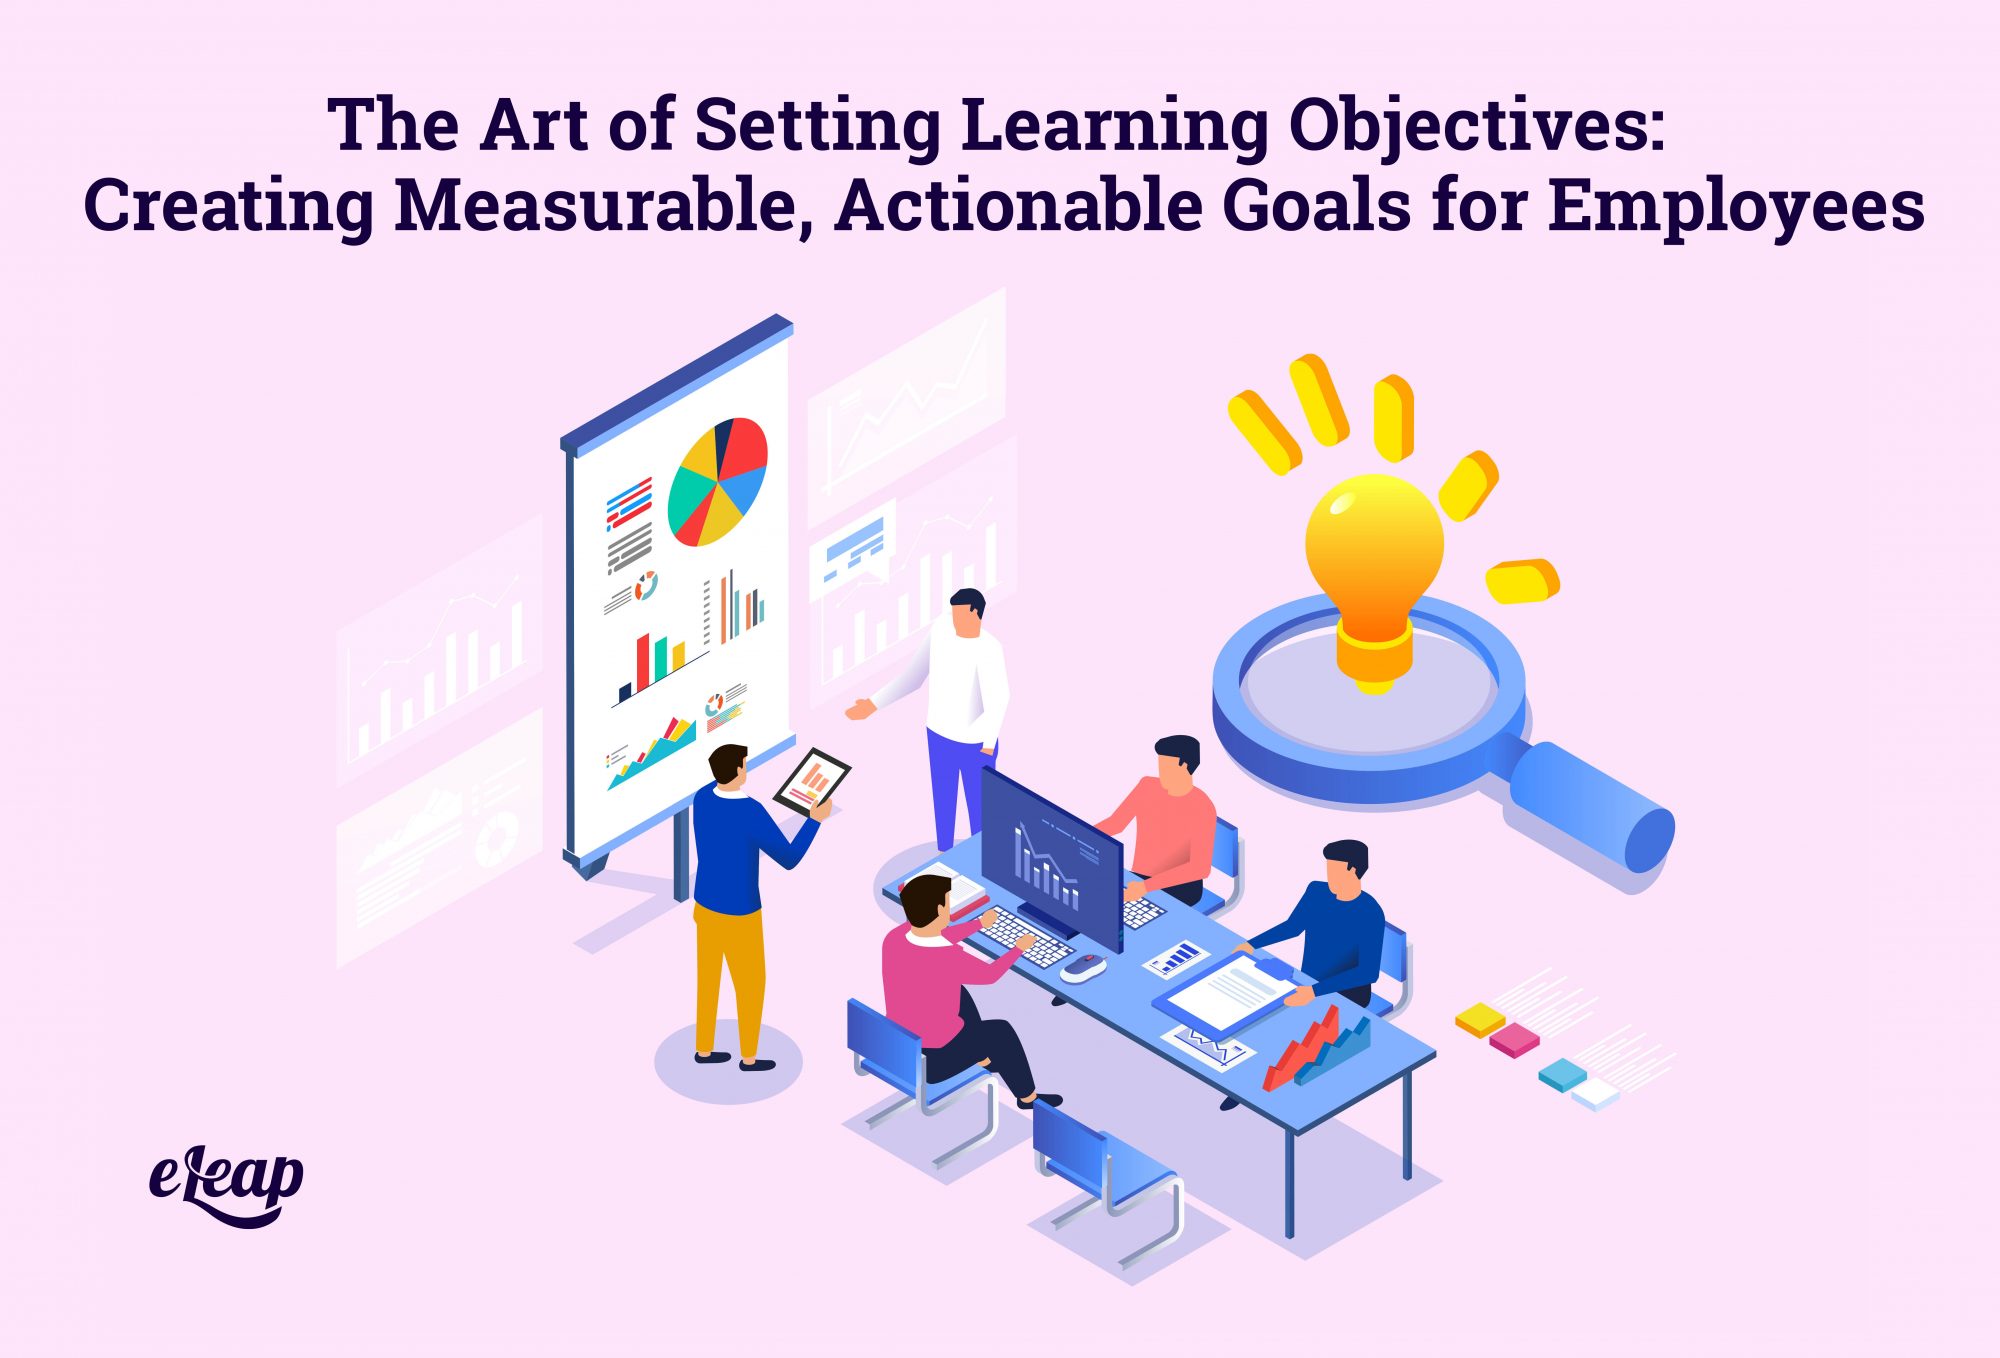 The Art of Setting Learning Objectives: Creating Measurable, Actionable Goals for Employees